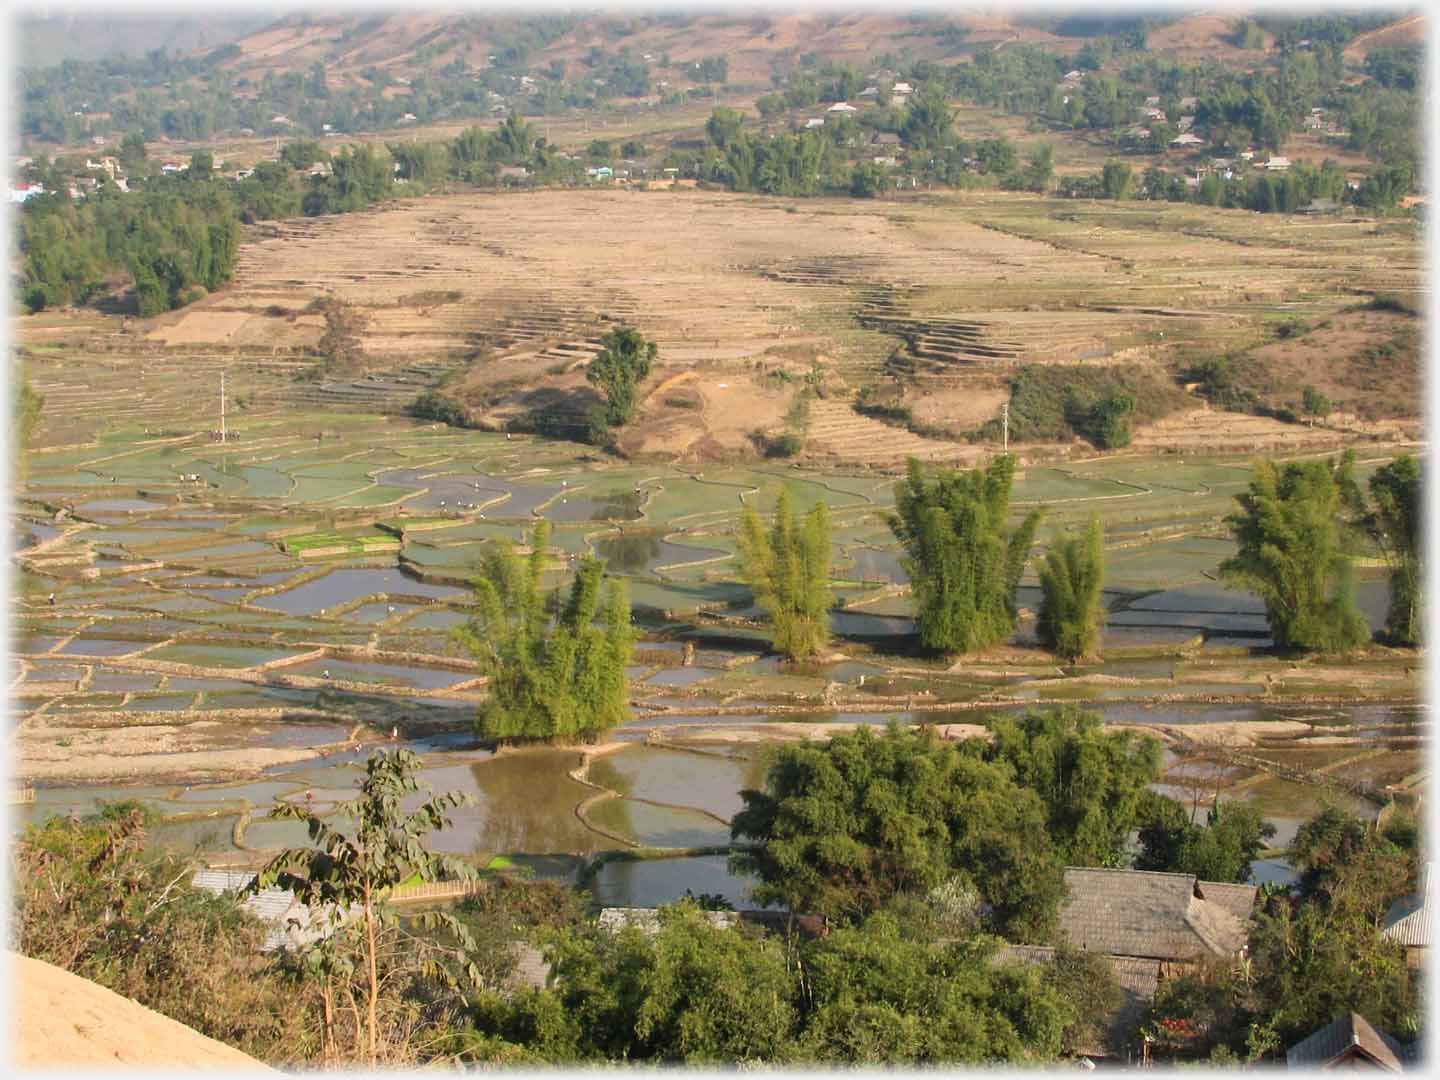 General view of many fields with water filling them, green shoots appearing and bamboos separateing some fields.